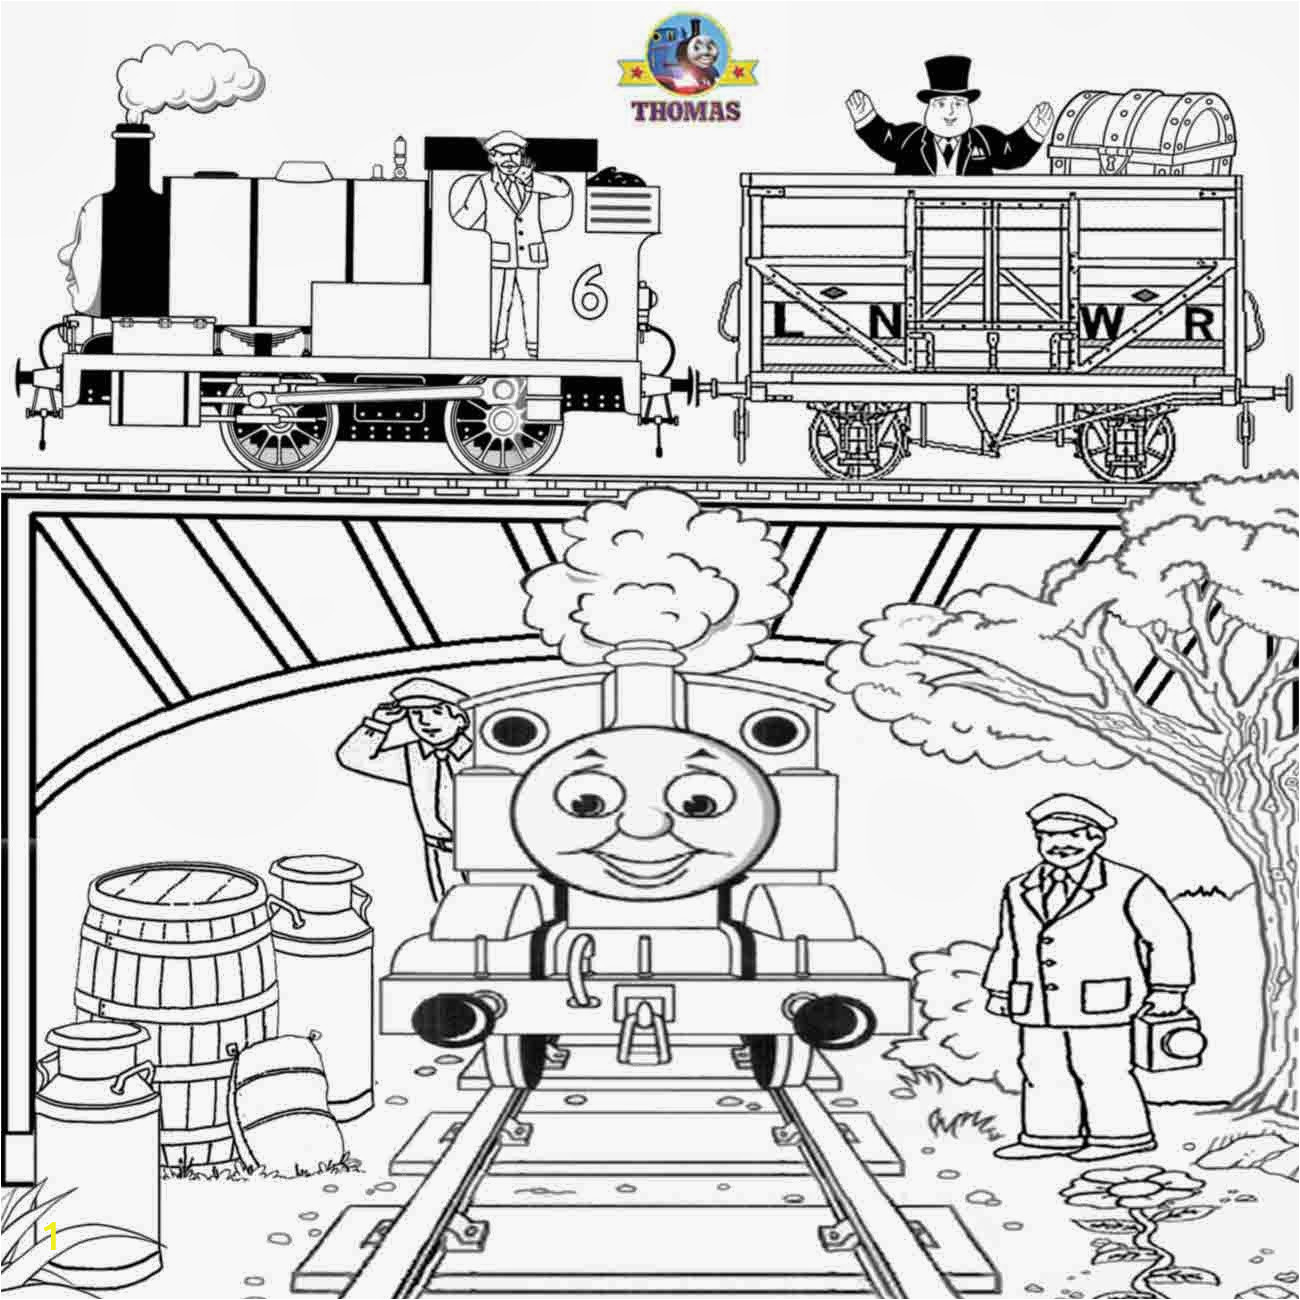 Thomas the Train Halloween Coloring Pages Free Halloween Coloring Pages Printable to Color